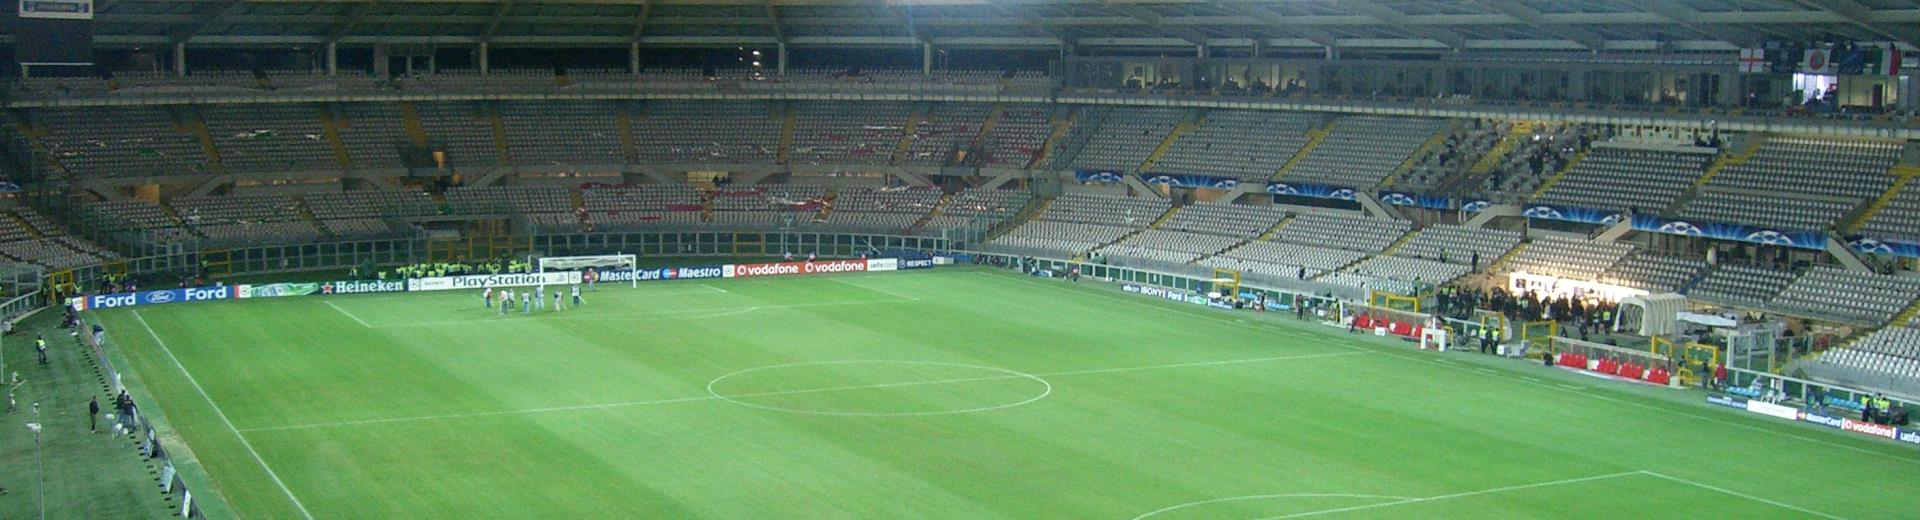 All Turin FC matches at the Olympic Stadium in Turin: stay at the BW Plus Hotel Genova